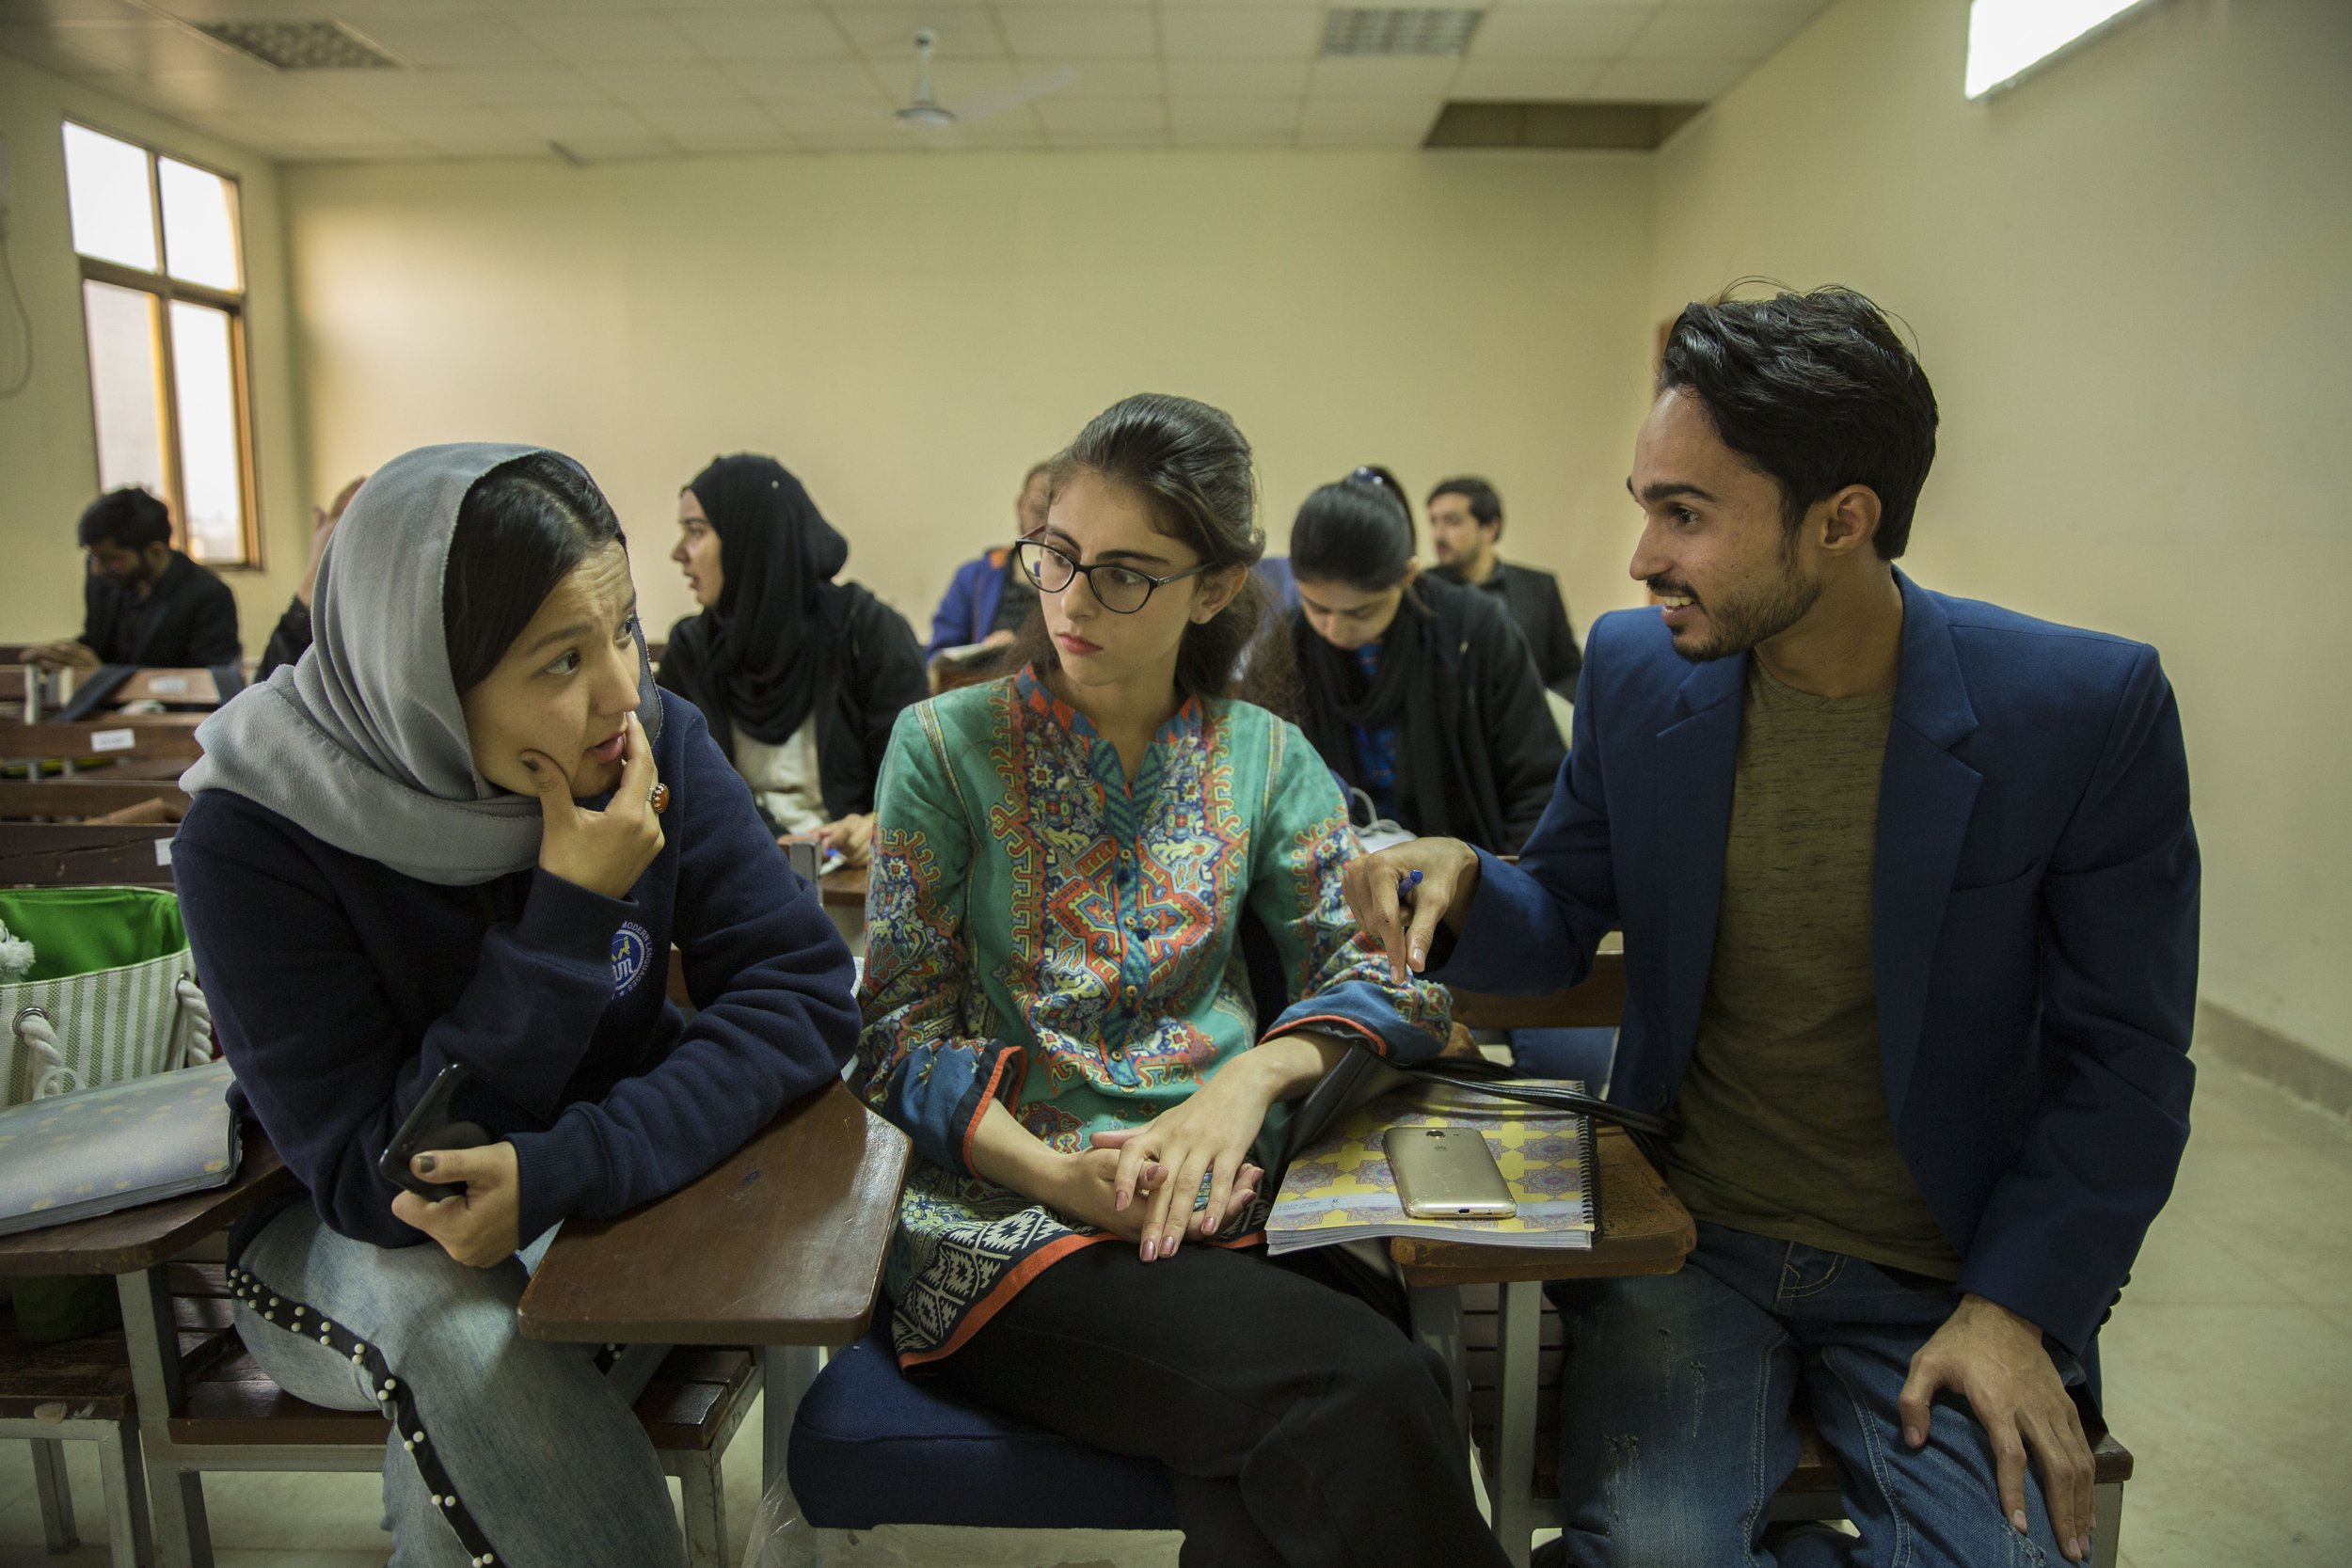  Haleema, 22, at left, chats with classmates during poetry class. 